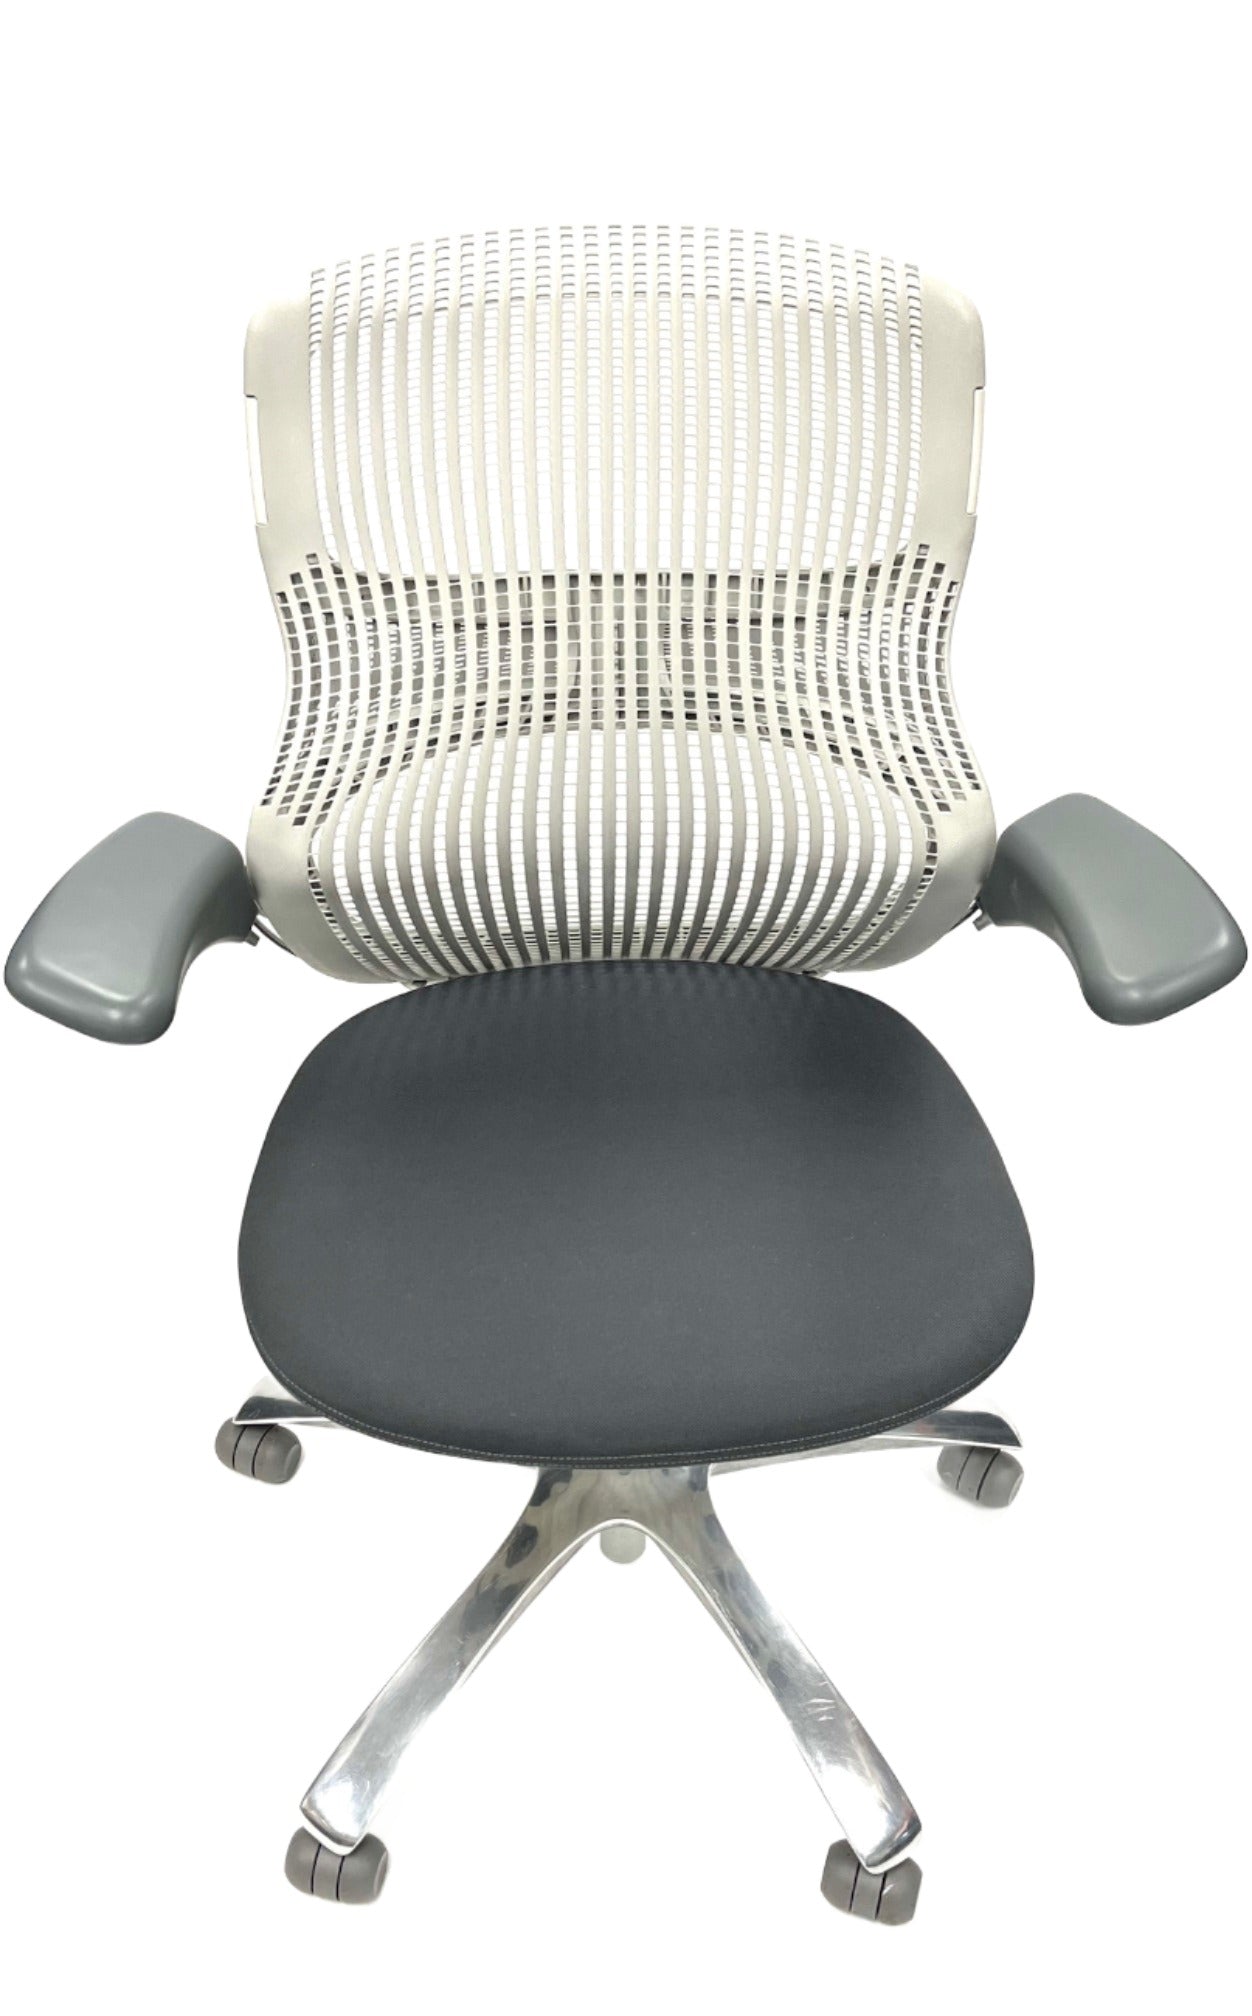 Pre-Owned Generation Task Chair-WB OFFICE SHOP